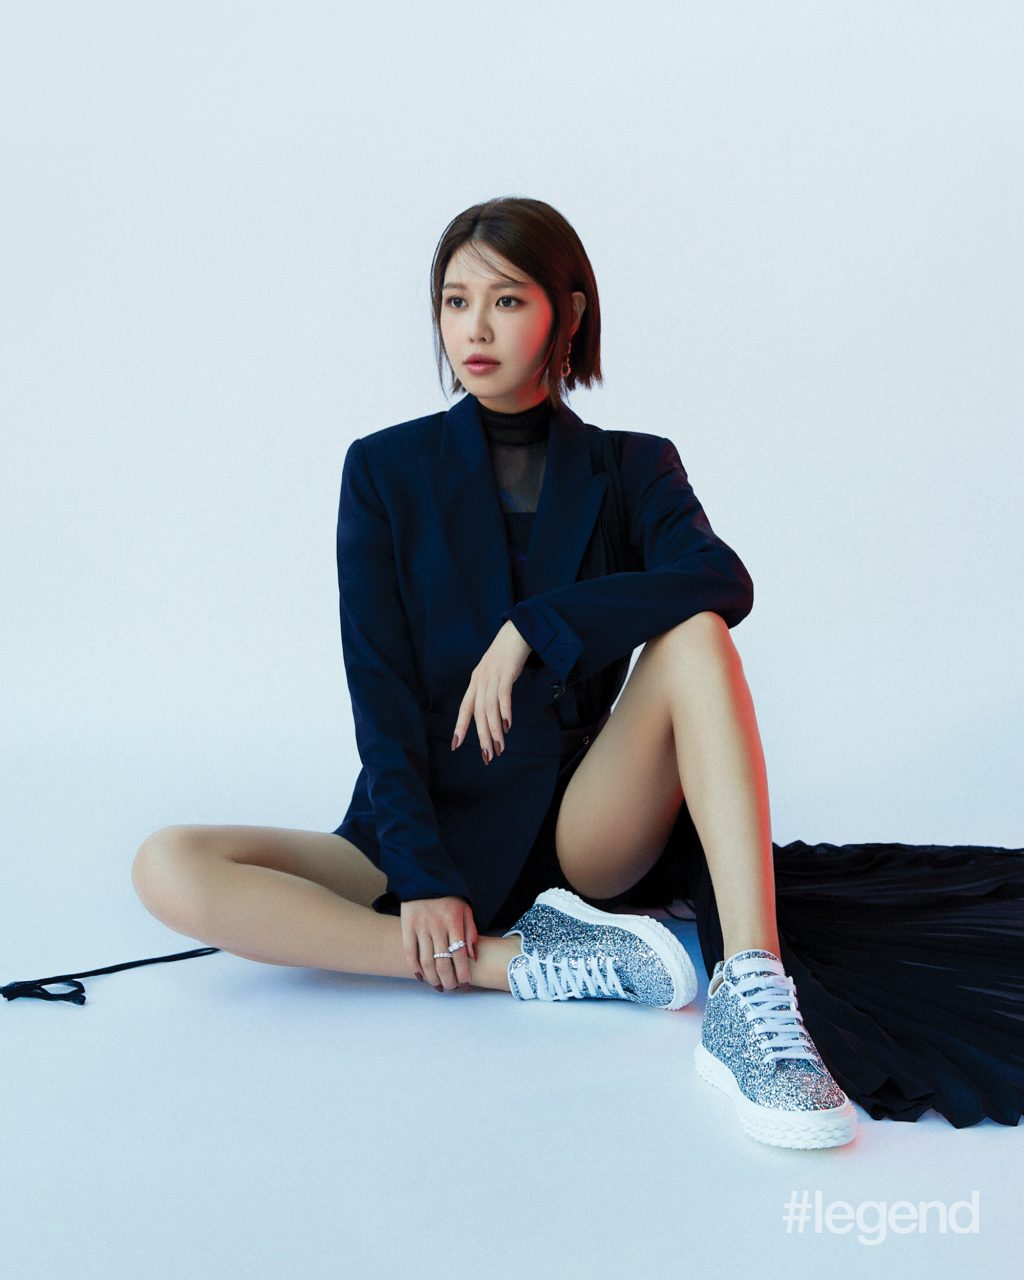 Cover Story: Sooyoung Choi on artistic pursuits - Hashtag Legend